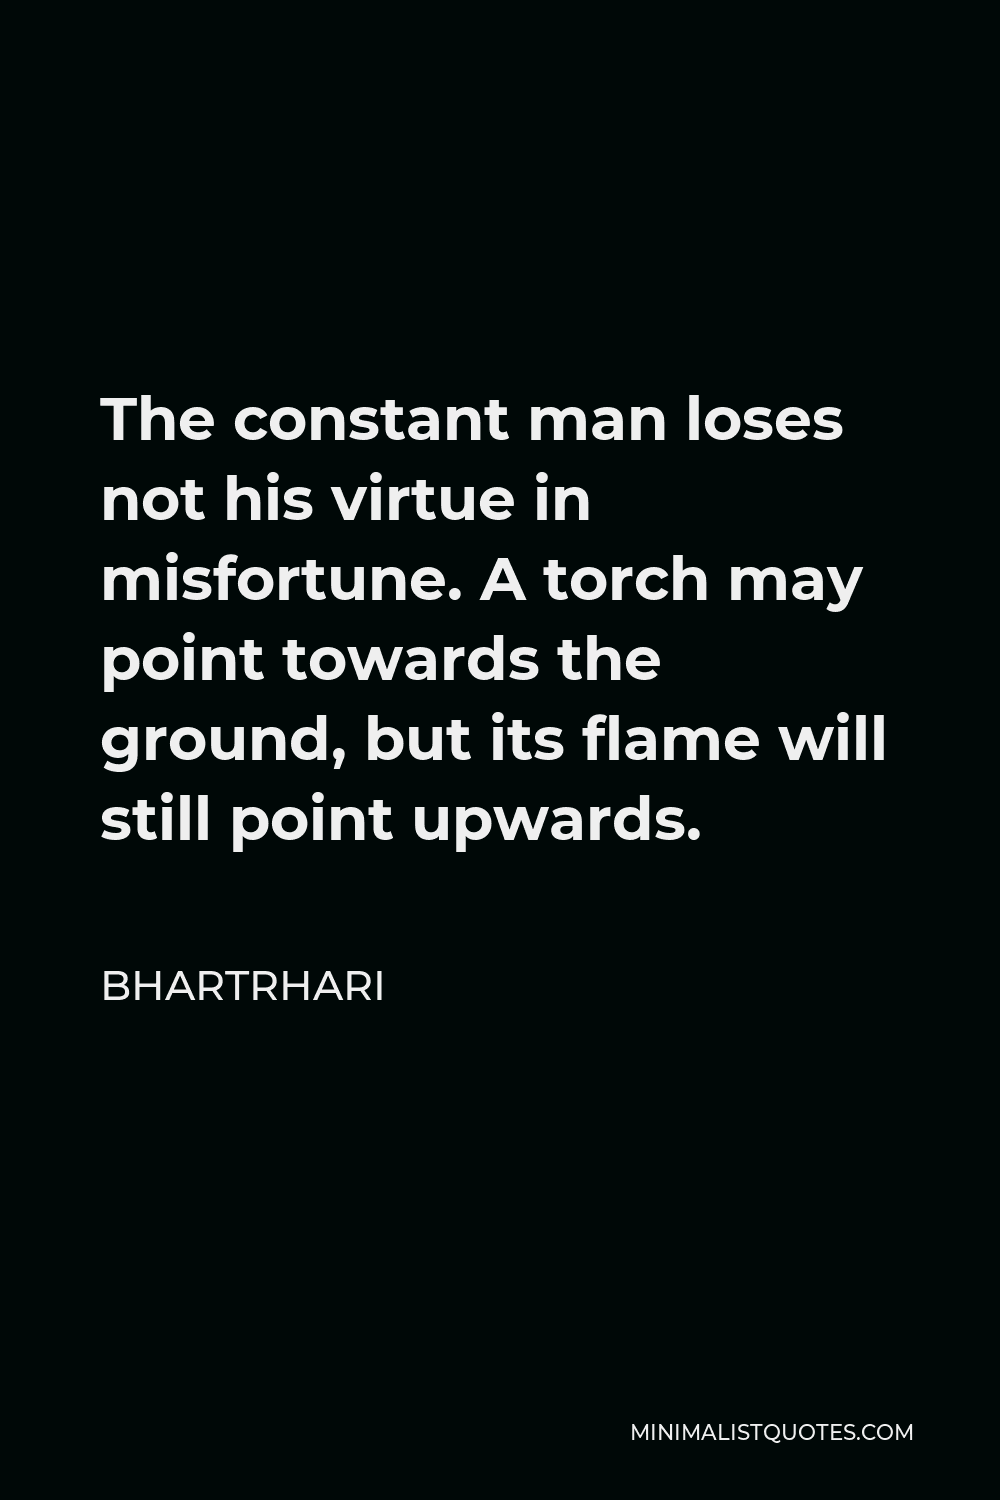 Bhartrhari Quote - The constant man loses not his virtue in misfortune. A torch may point towards the ground, but its flame will still point upwards.